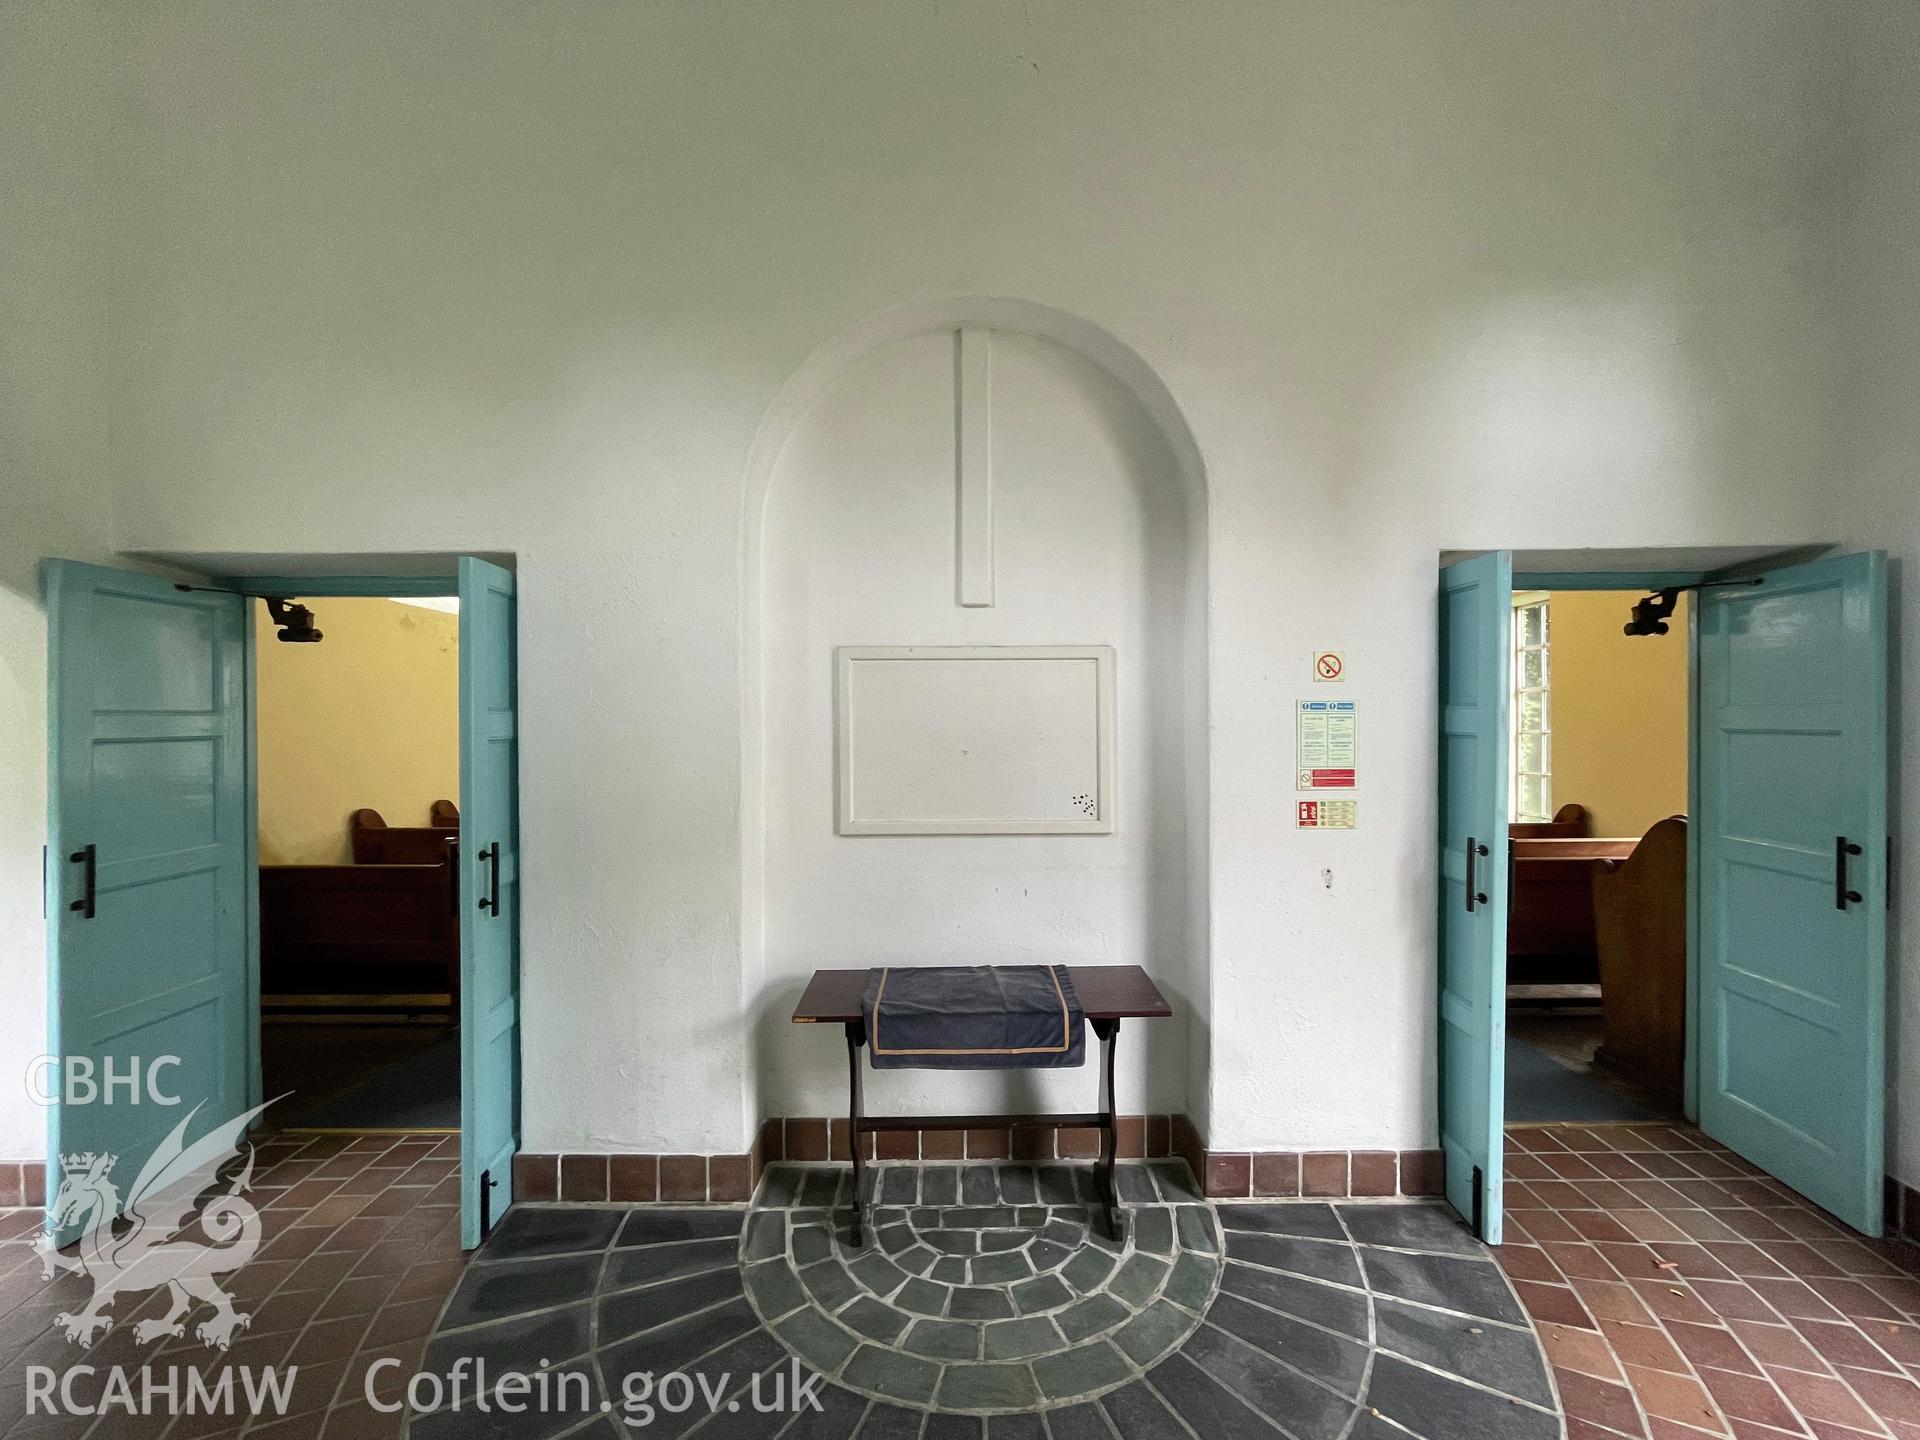 Colour photograph showing vestibule north elevation - part of a photographic record relating to Moriah Chapel, Llanystumdwy, produced as a condition of planning consent (Planning Reference C21/0420/41/LL; Gwynedd Council).